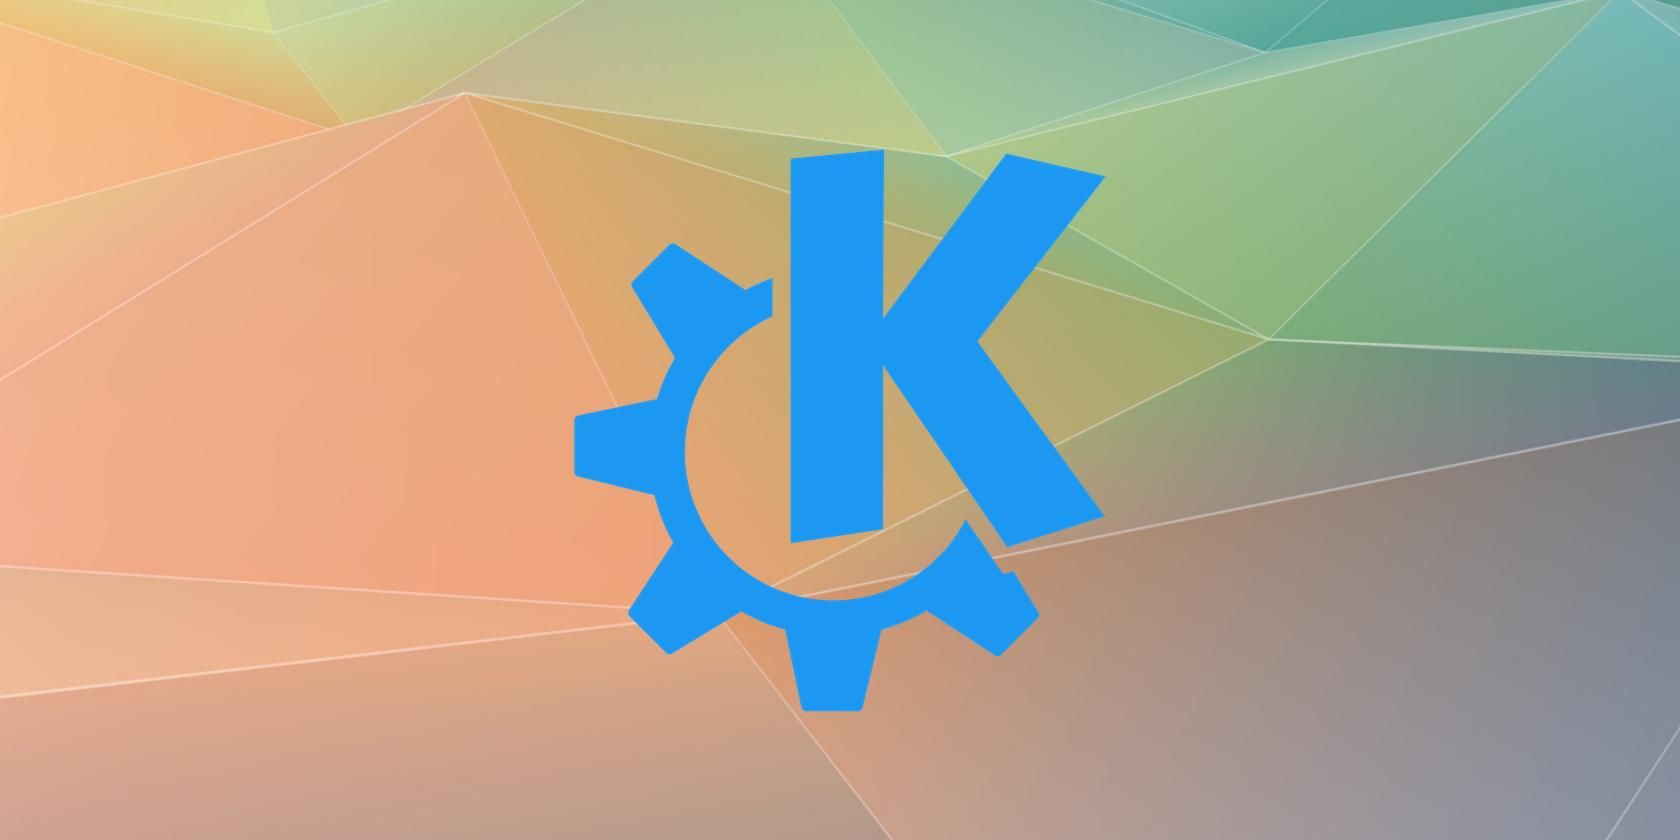 6 Reasons Why Many Linux Distros Don’t Ship KDE by Default